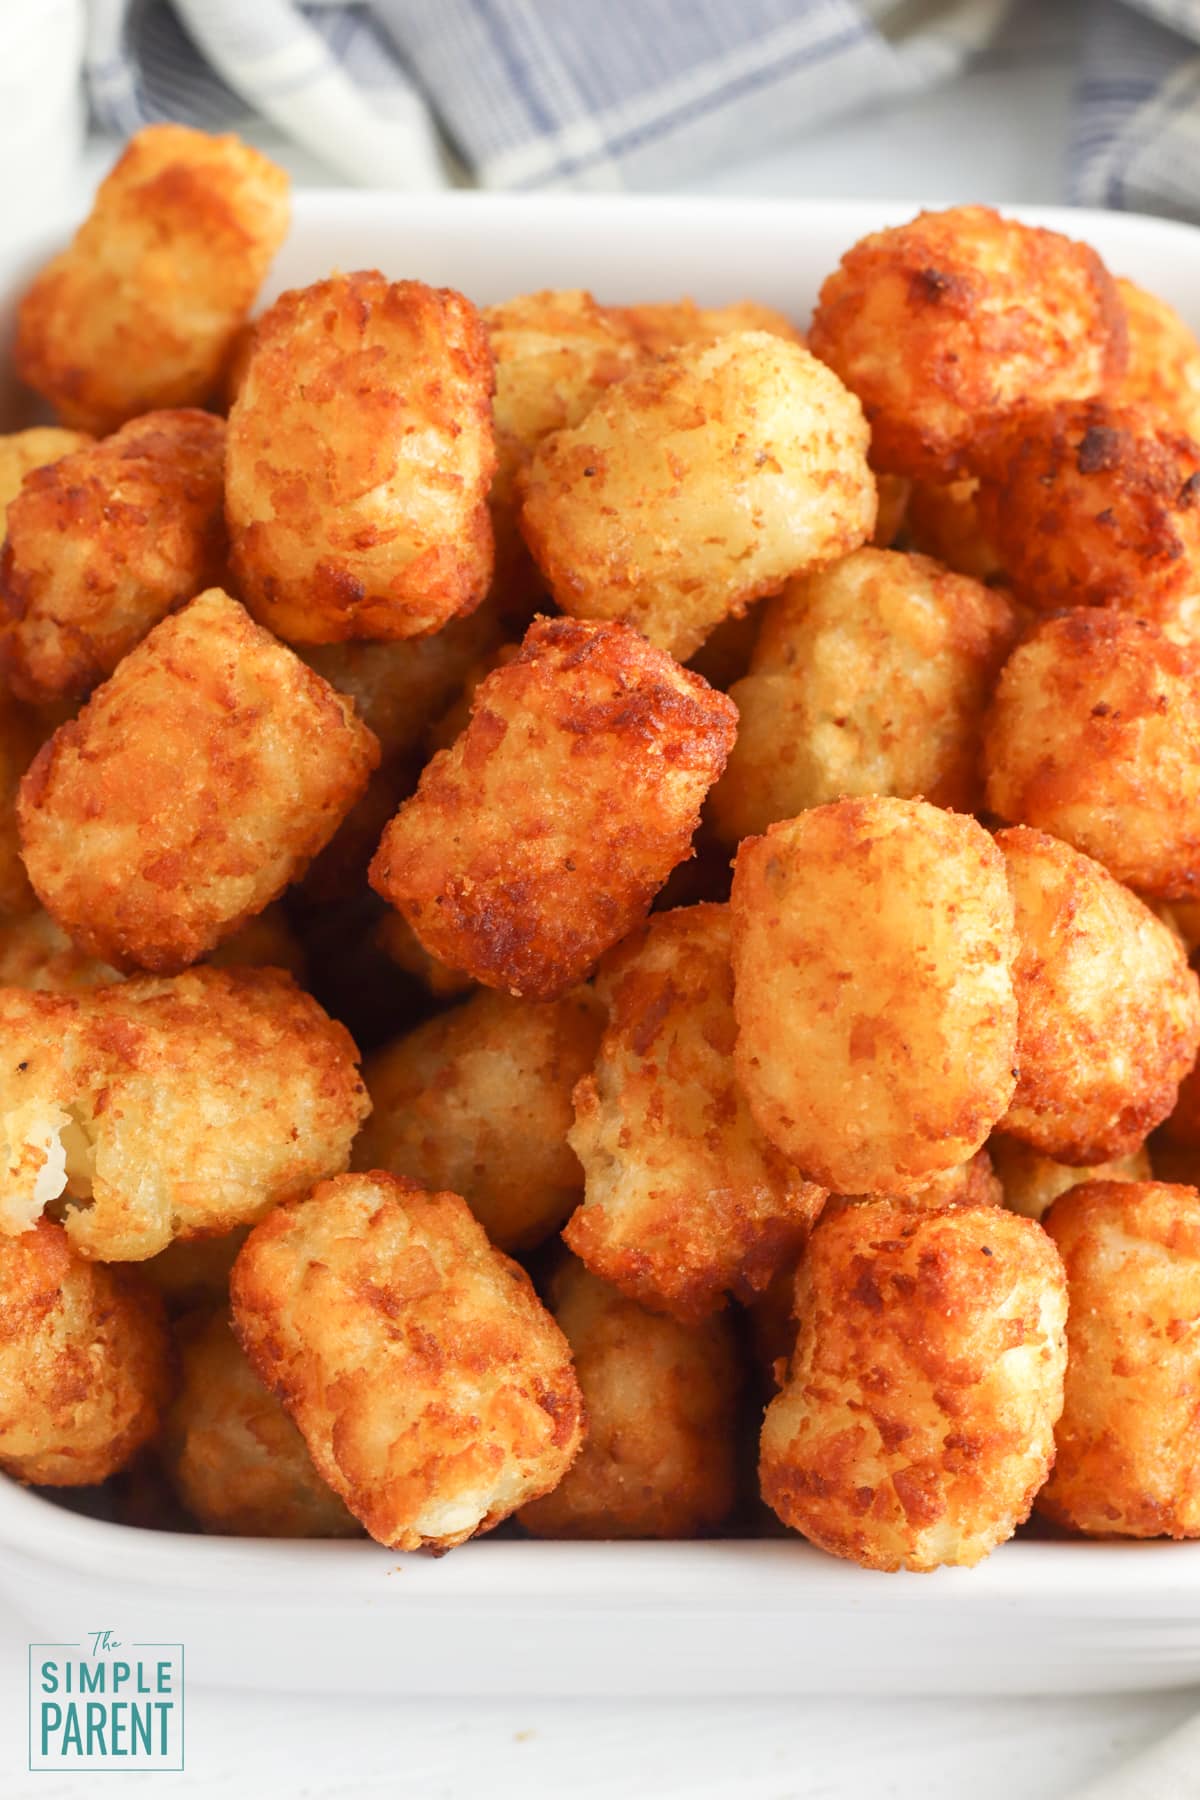 Cooked frozen tater tots in white bowl